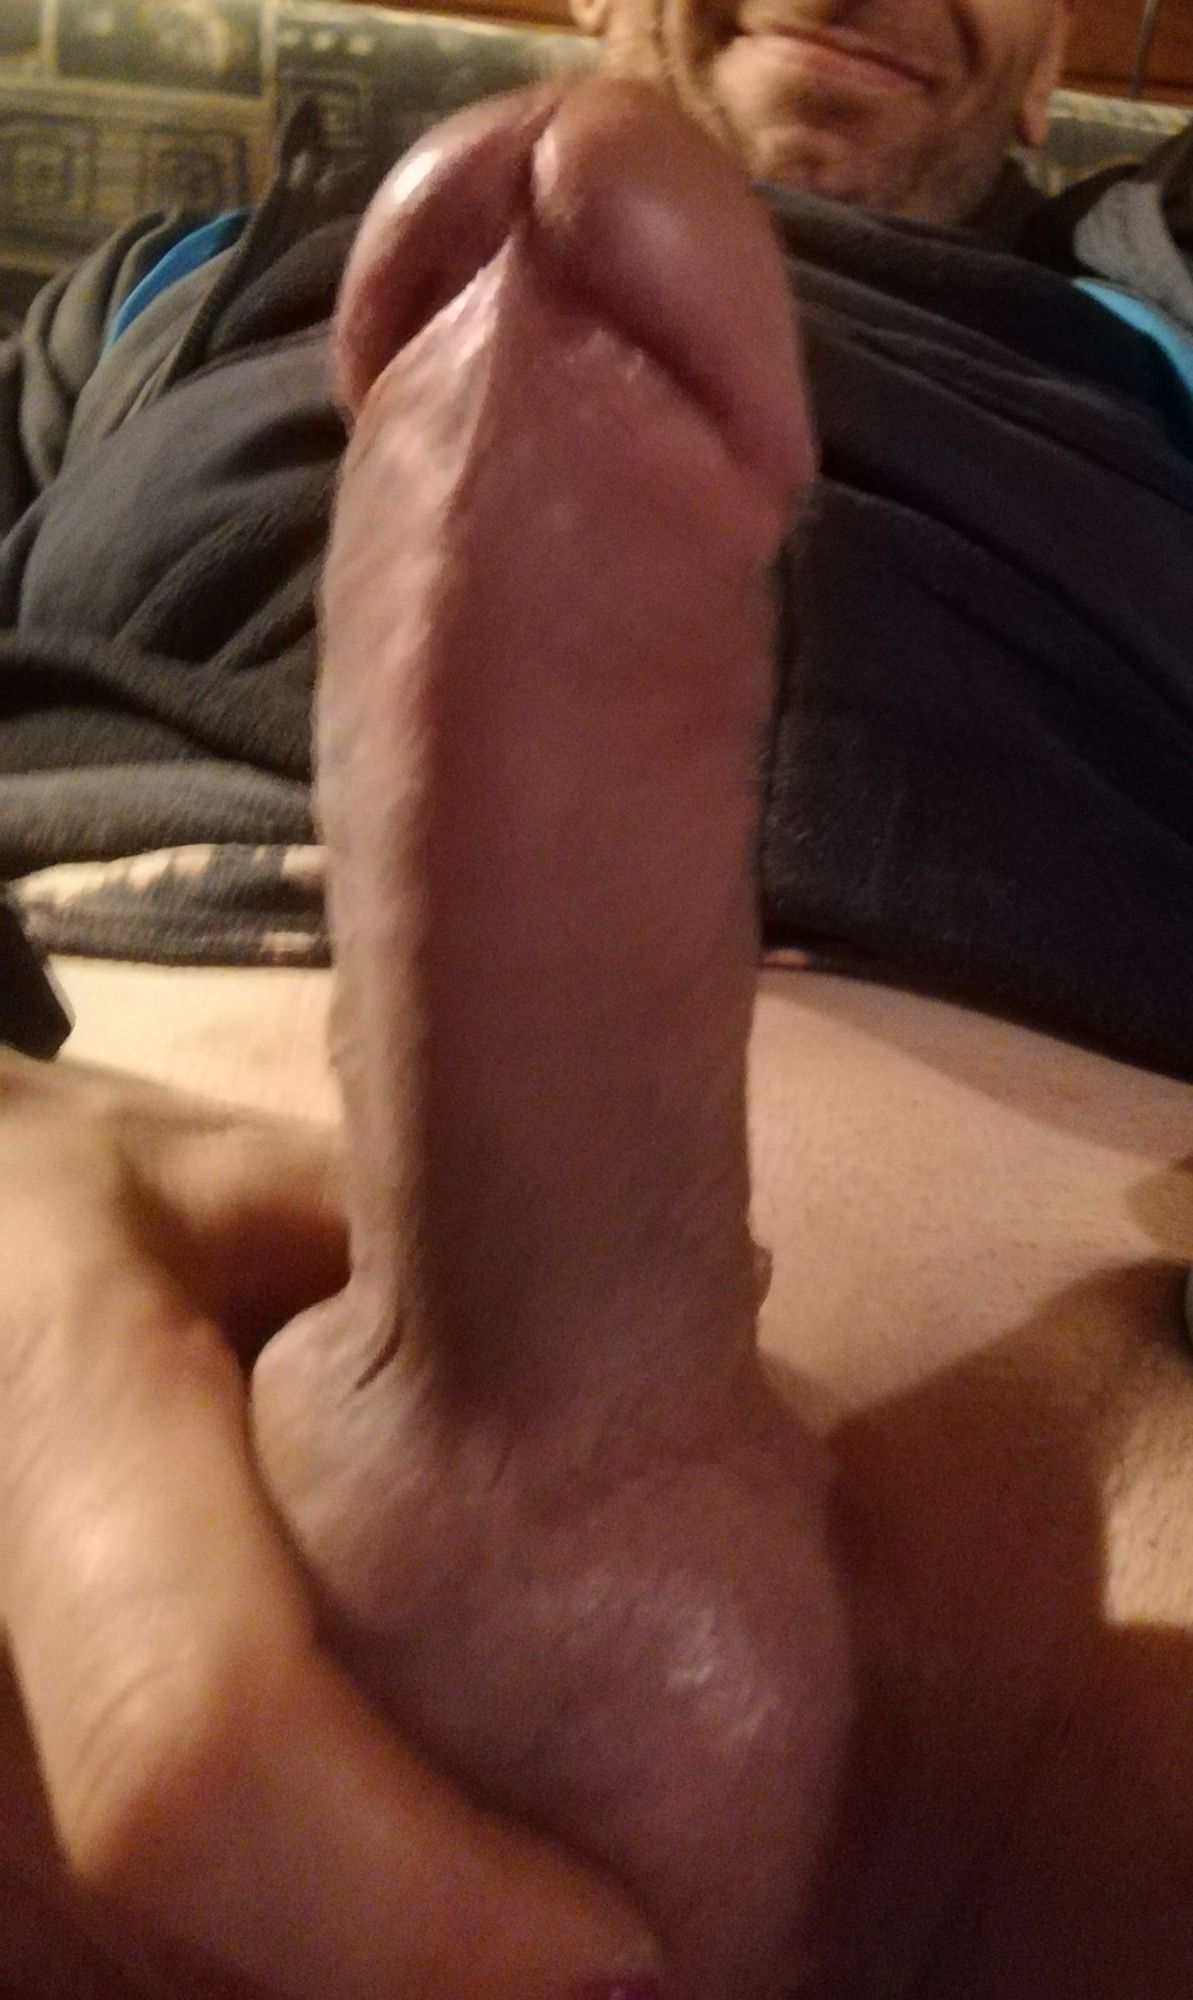 me&my cock 